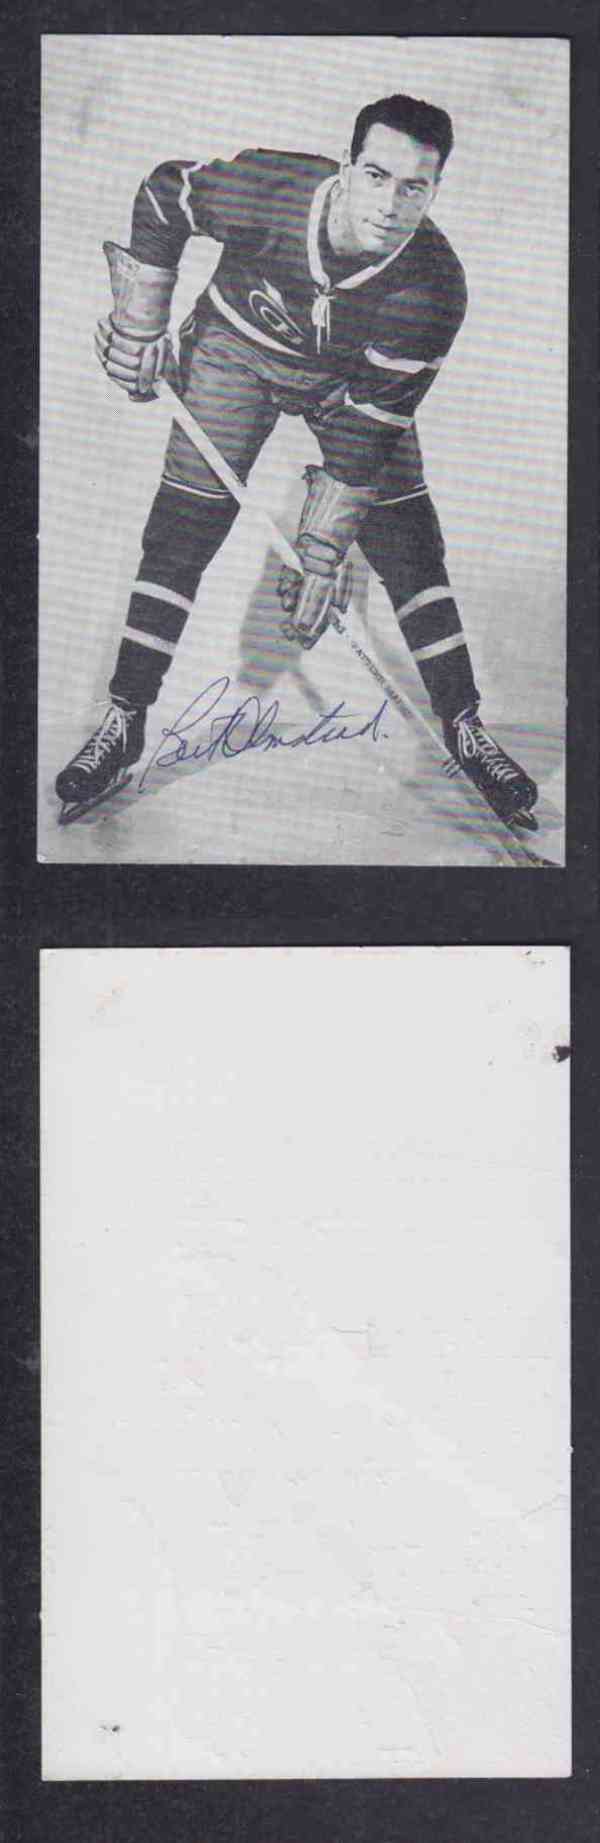 1960 'S MONTREAL CANADIENS B.OLMSTEAD  AUTOGRAPHED POST CARD photo